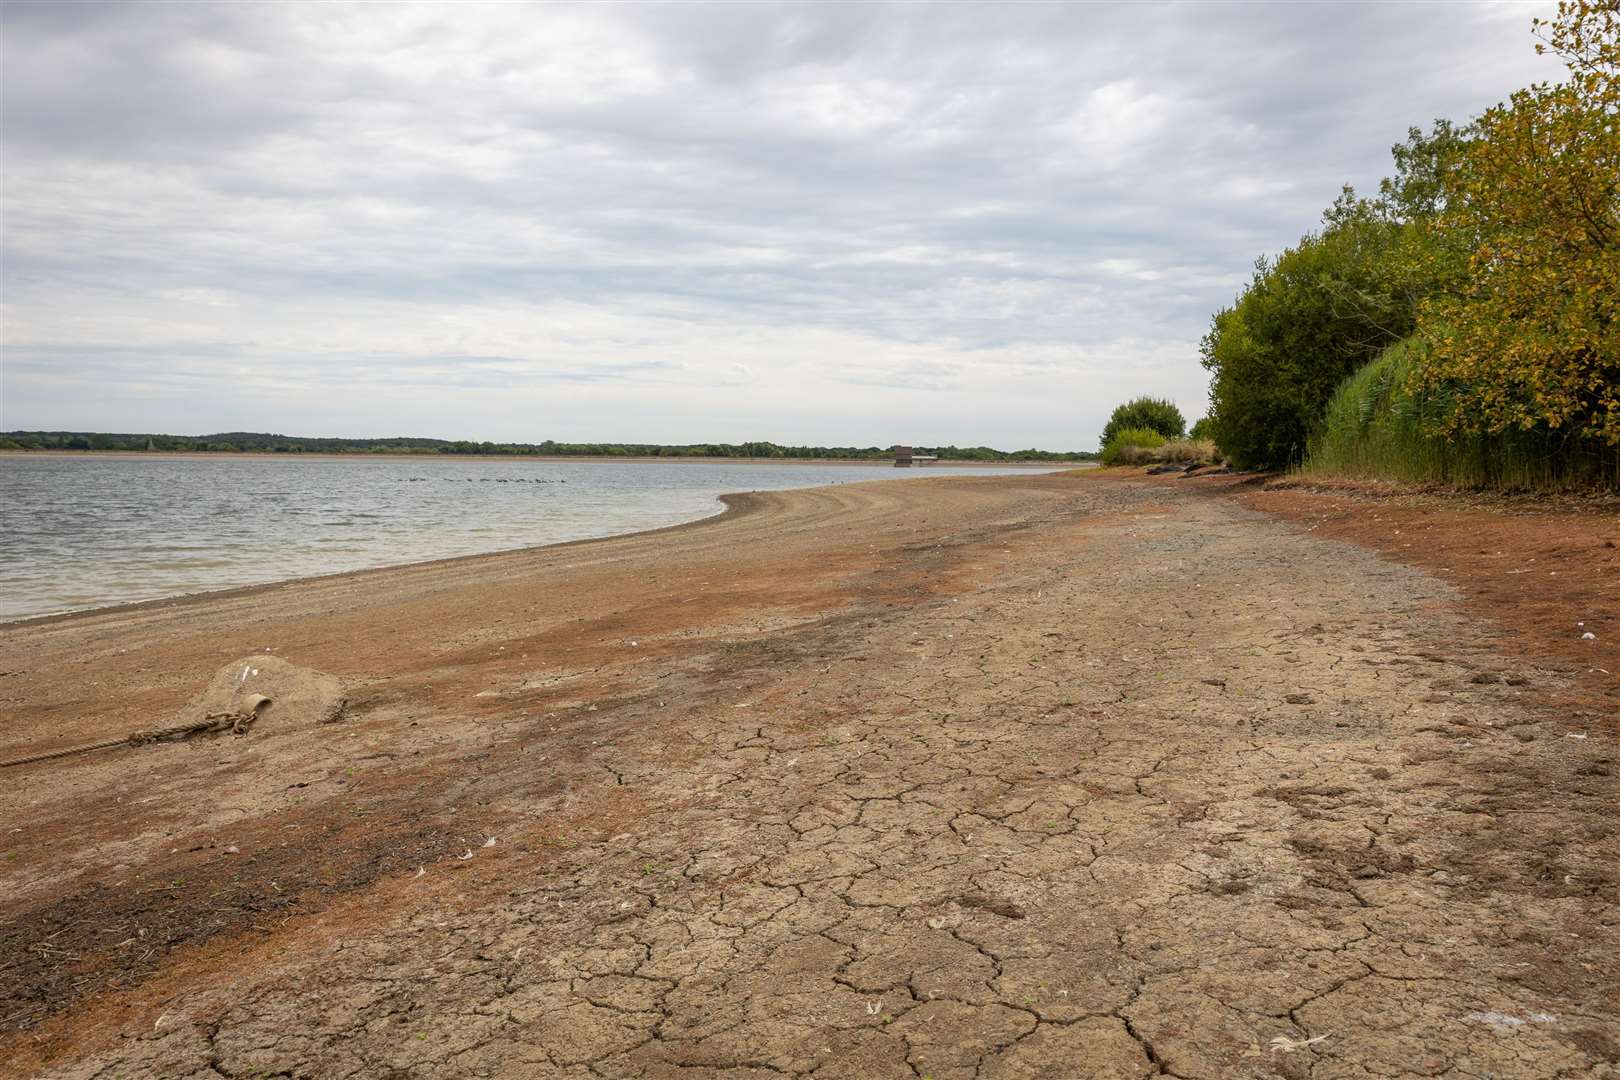 Low water supplies at South East Water's Arlington Reservoir in East Sussex